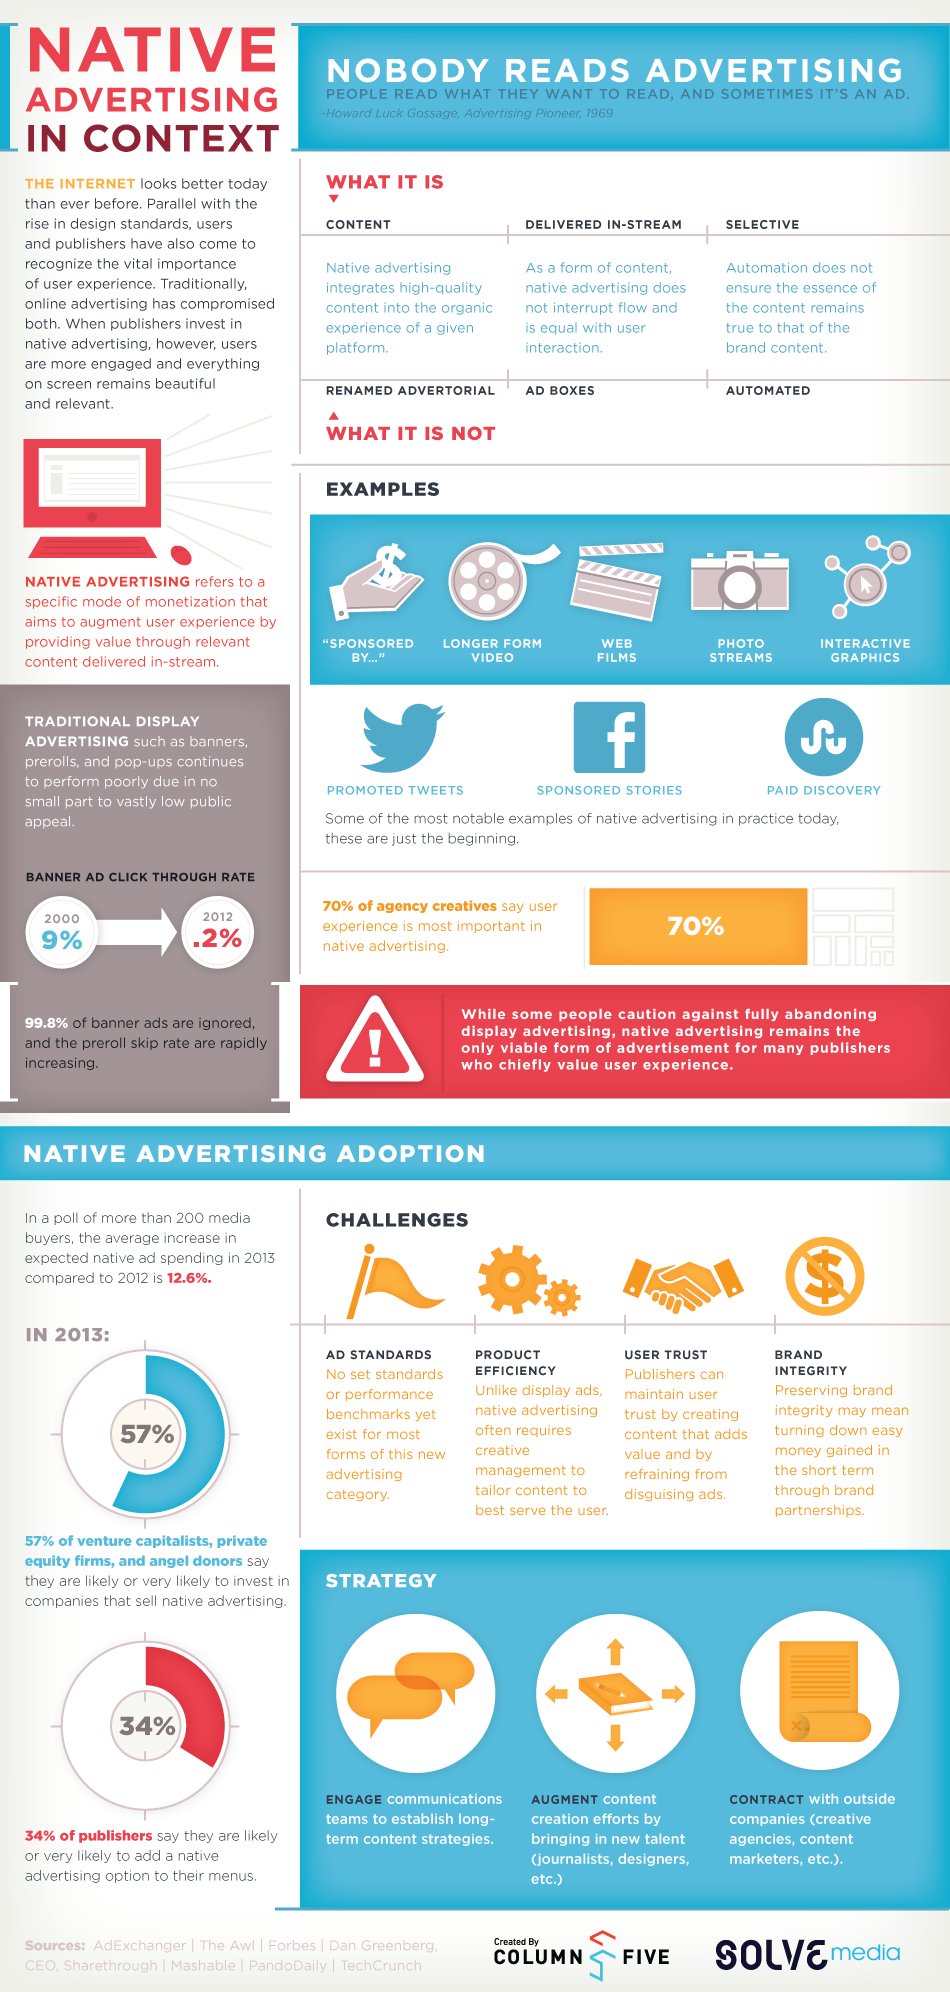 INFOGRAPHIC: Native Advertising in Context | Solve Media